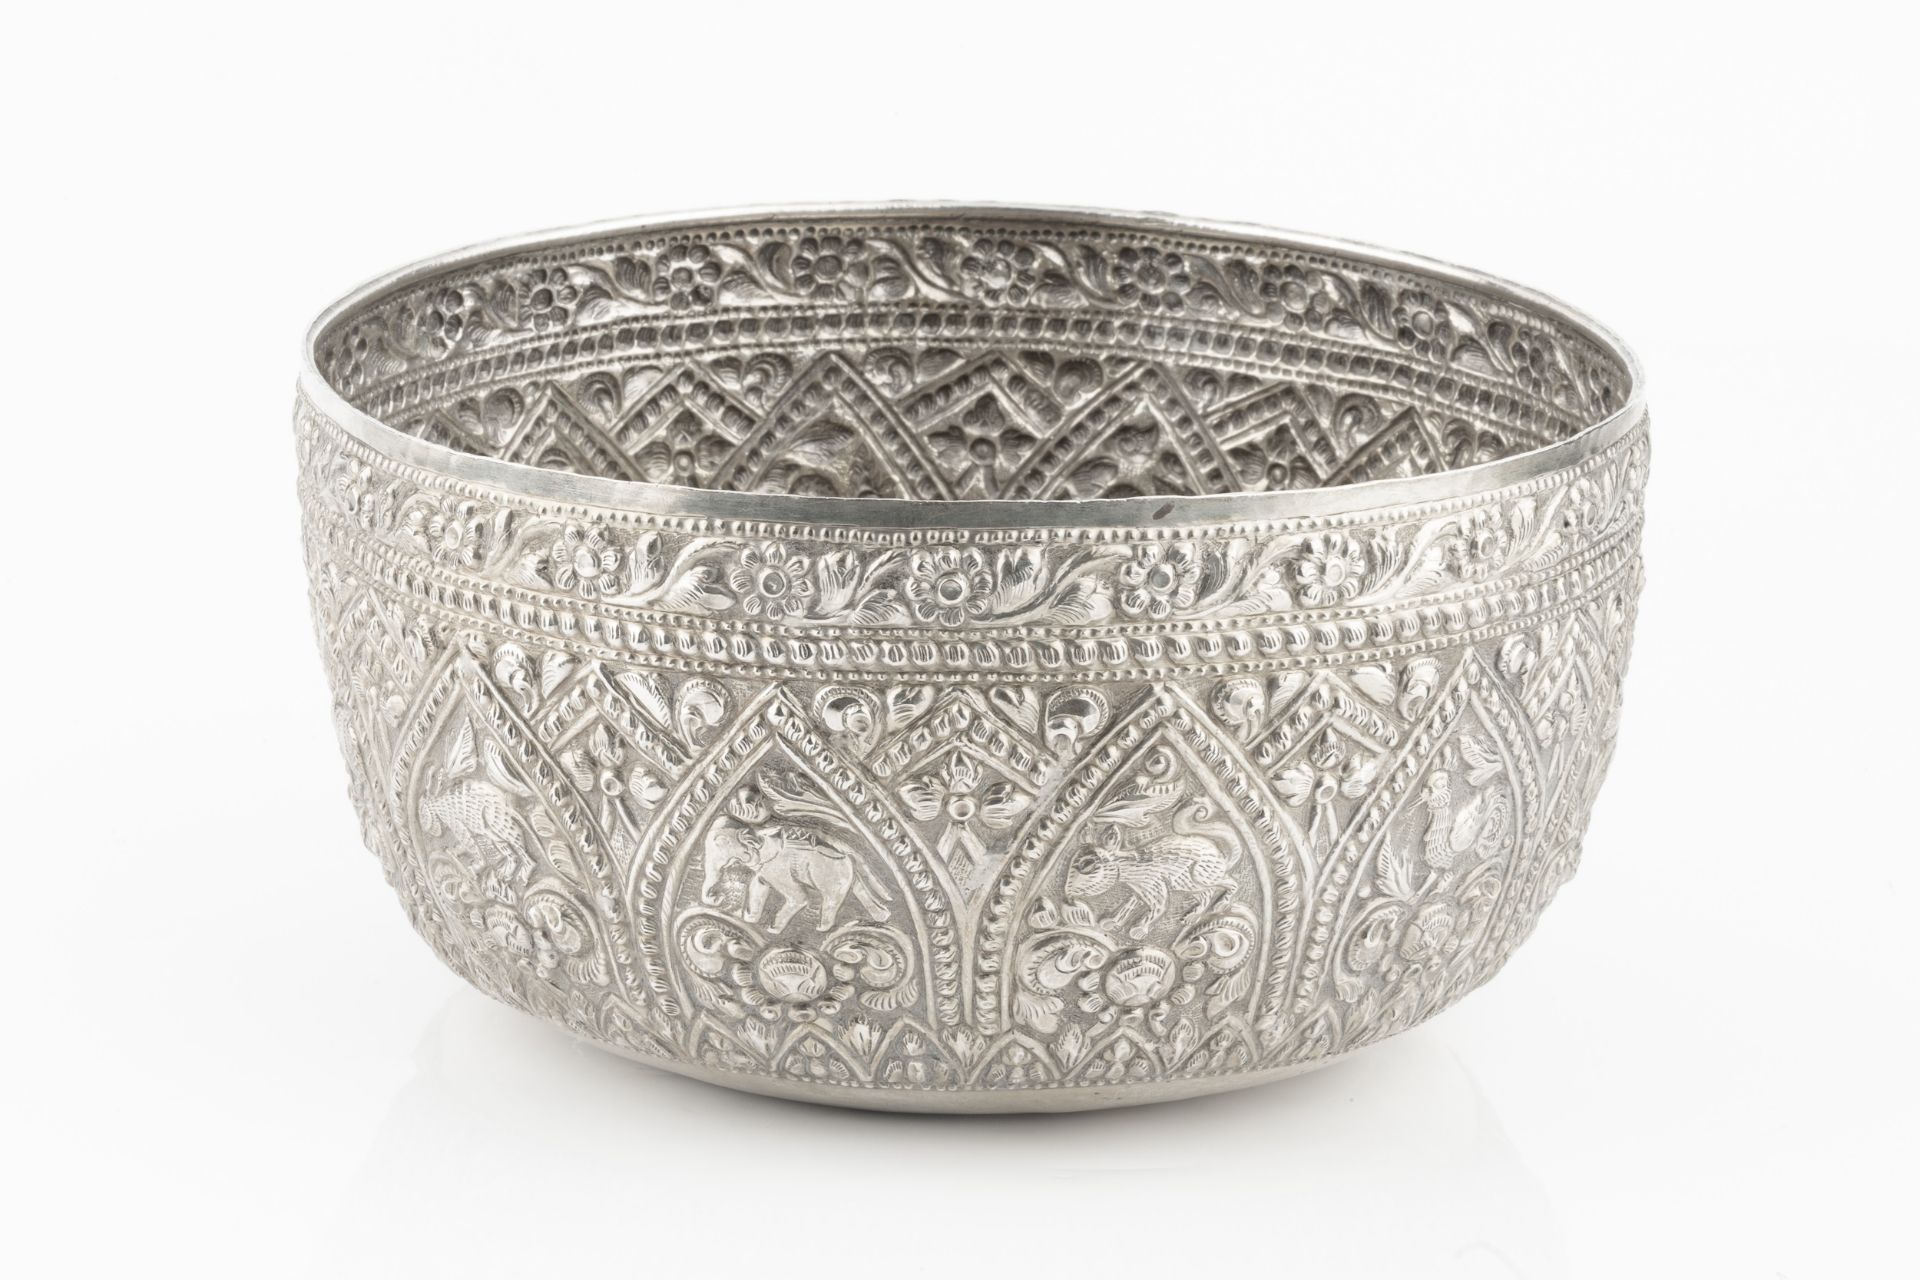 A Burmese white metal thabeik bowl, embossed and engraved with numerous animals and stylised foliage - Image 2 of 2